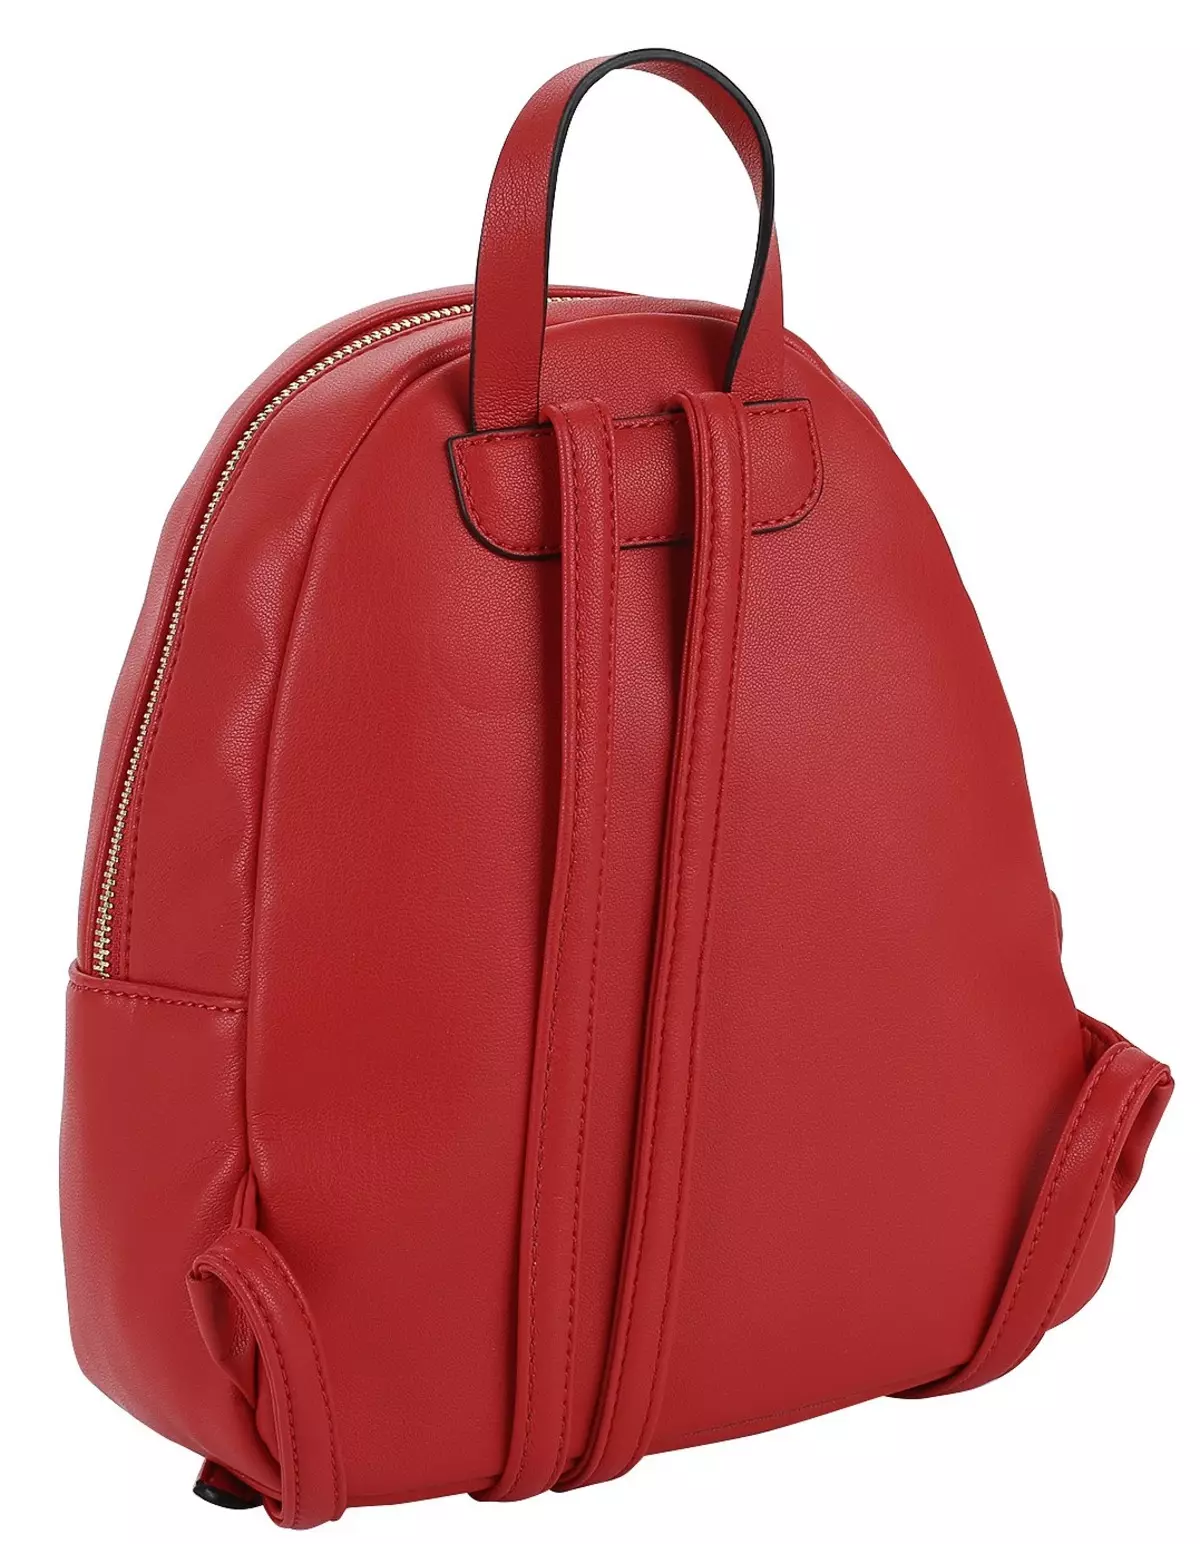 Backpacks Guess: Black and Red, White and Pink, Brown and Quilted Leather, Blue Denim, Silver and Other Models 23677_37